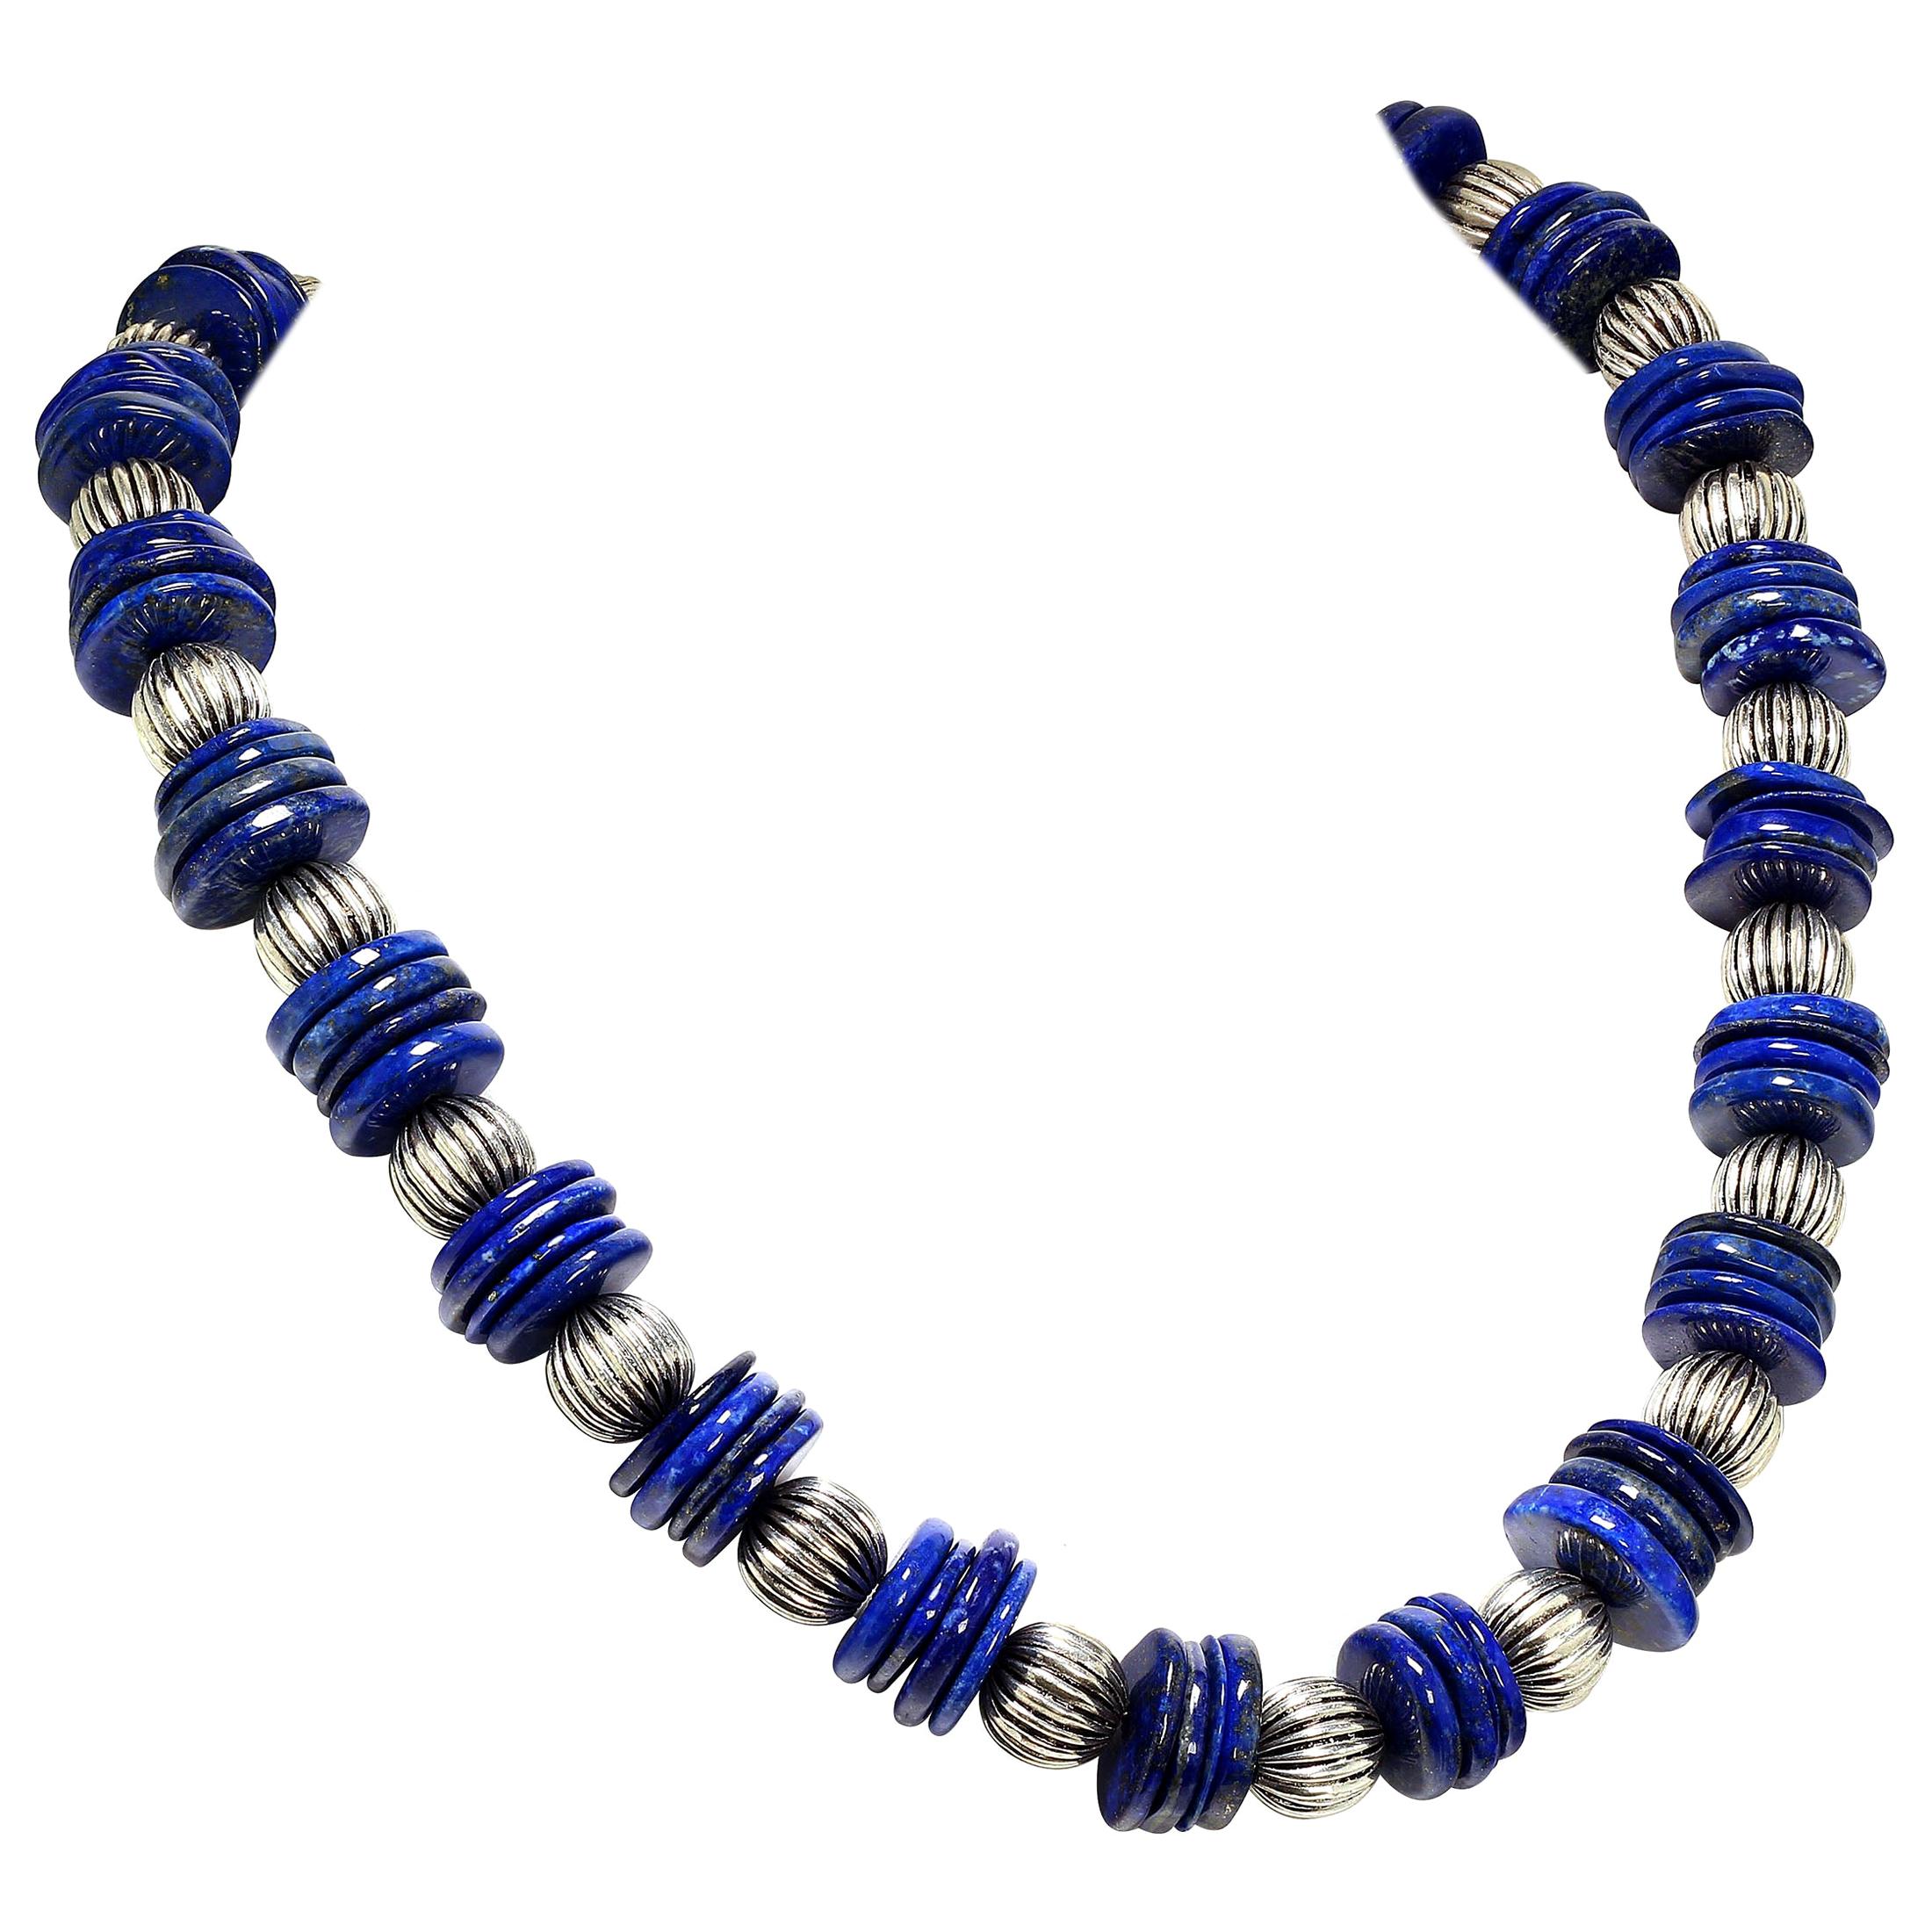 This is your new 'go to' Lapis necklace!  At 26 inches you will love wearing this elegant Lapis Lazuli statement necklace.  We have alternated groups of 18 MM Lapis slices with ribbed silver tone accents (14 MM).  The hightly polished Lapis slices